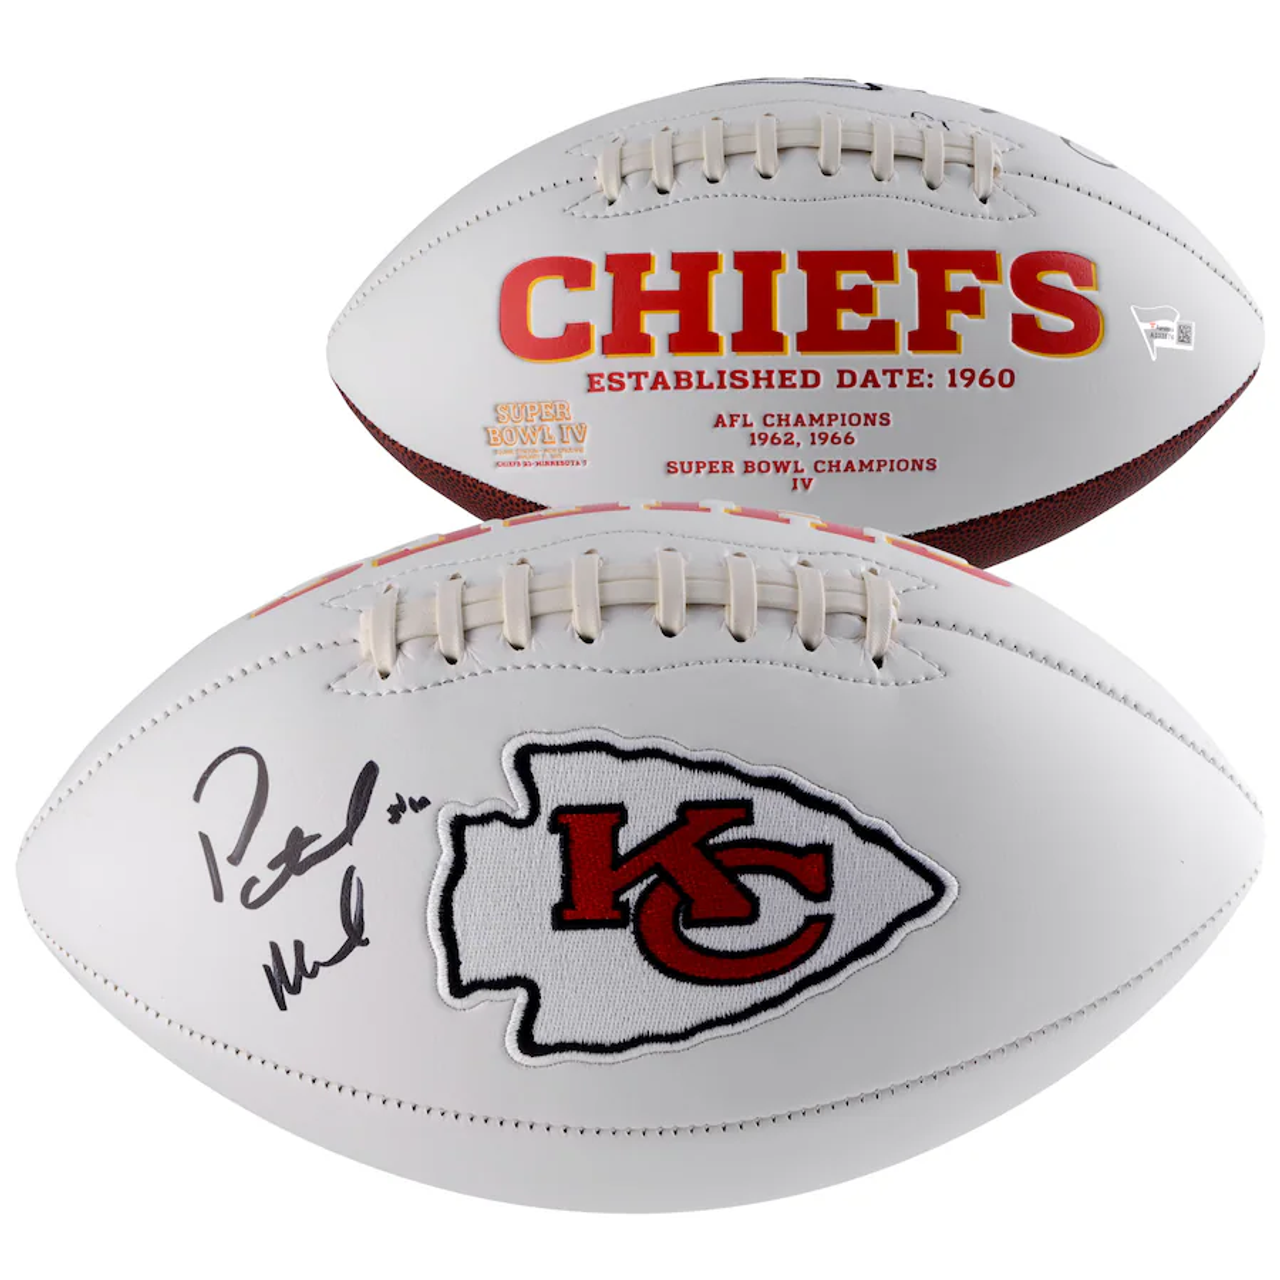 Buy Patrick Mahomes Kansas City Chiefs Super Bowl LVII Champions Sublimated  Plaque with Replica Ticket at Nikco Sports